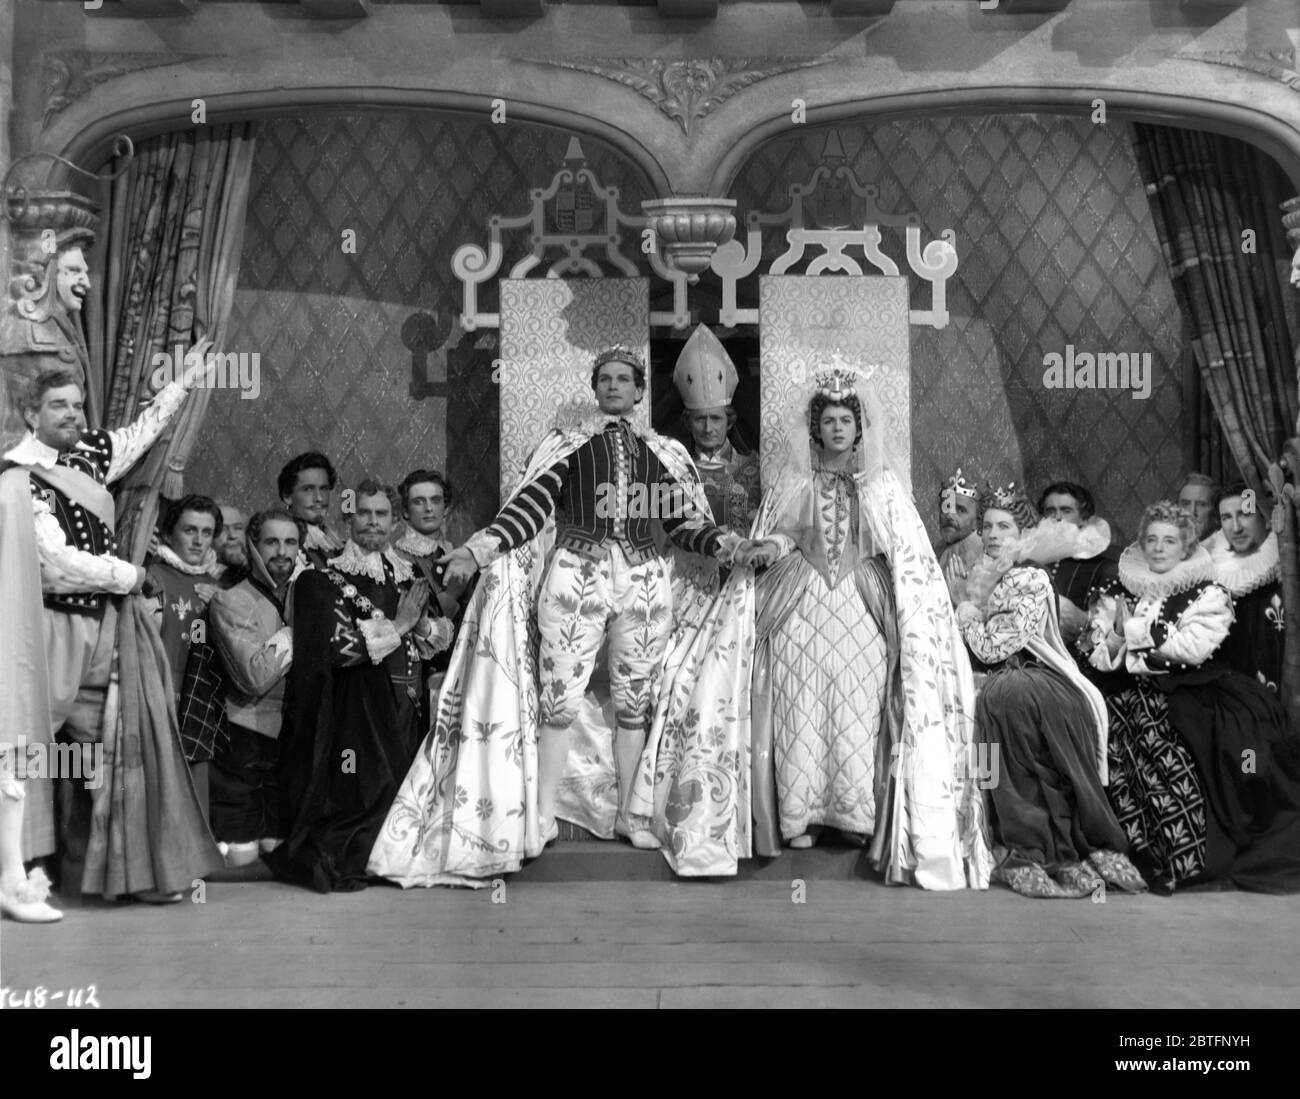 LESLIE BANKS VERNON GREEVES GERALD CASE GRIFFITH JONES  NICHOLAS HANNAN LAURENCE OLIVIER FELIX AYLMER unbilled boy as Princess Katharine and at far left RALPH TRUMAN in HENRY V 1944 director LAURENCE OLIVIER play William Shakespeare music William Walton Two Cities Films / Eagle - Lion Distributors Ltd Stock Photo